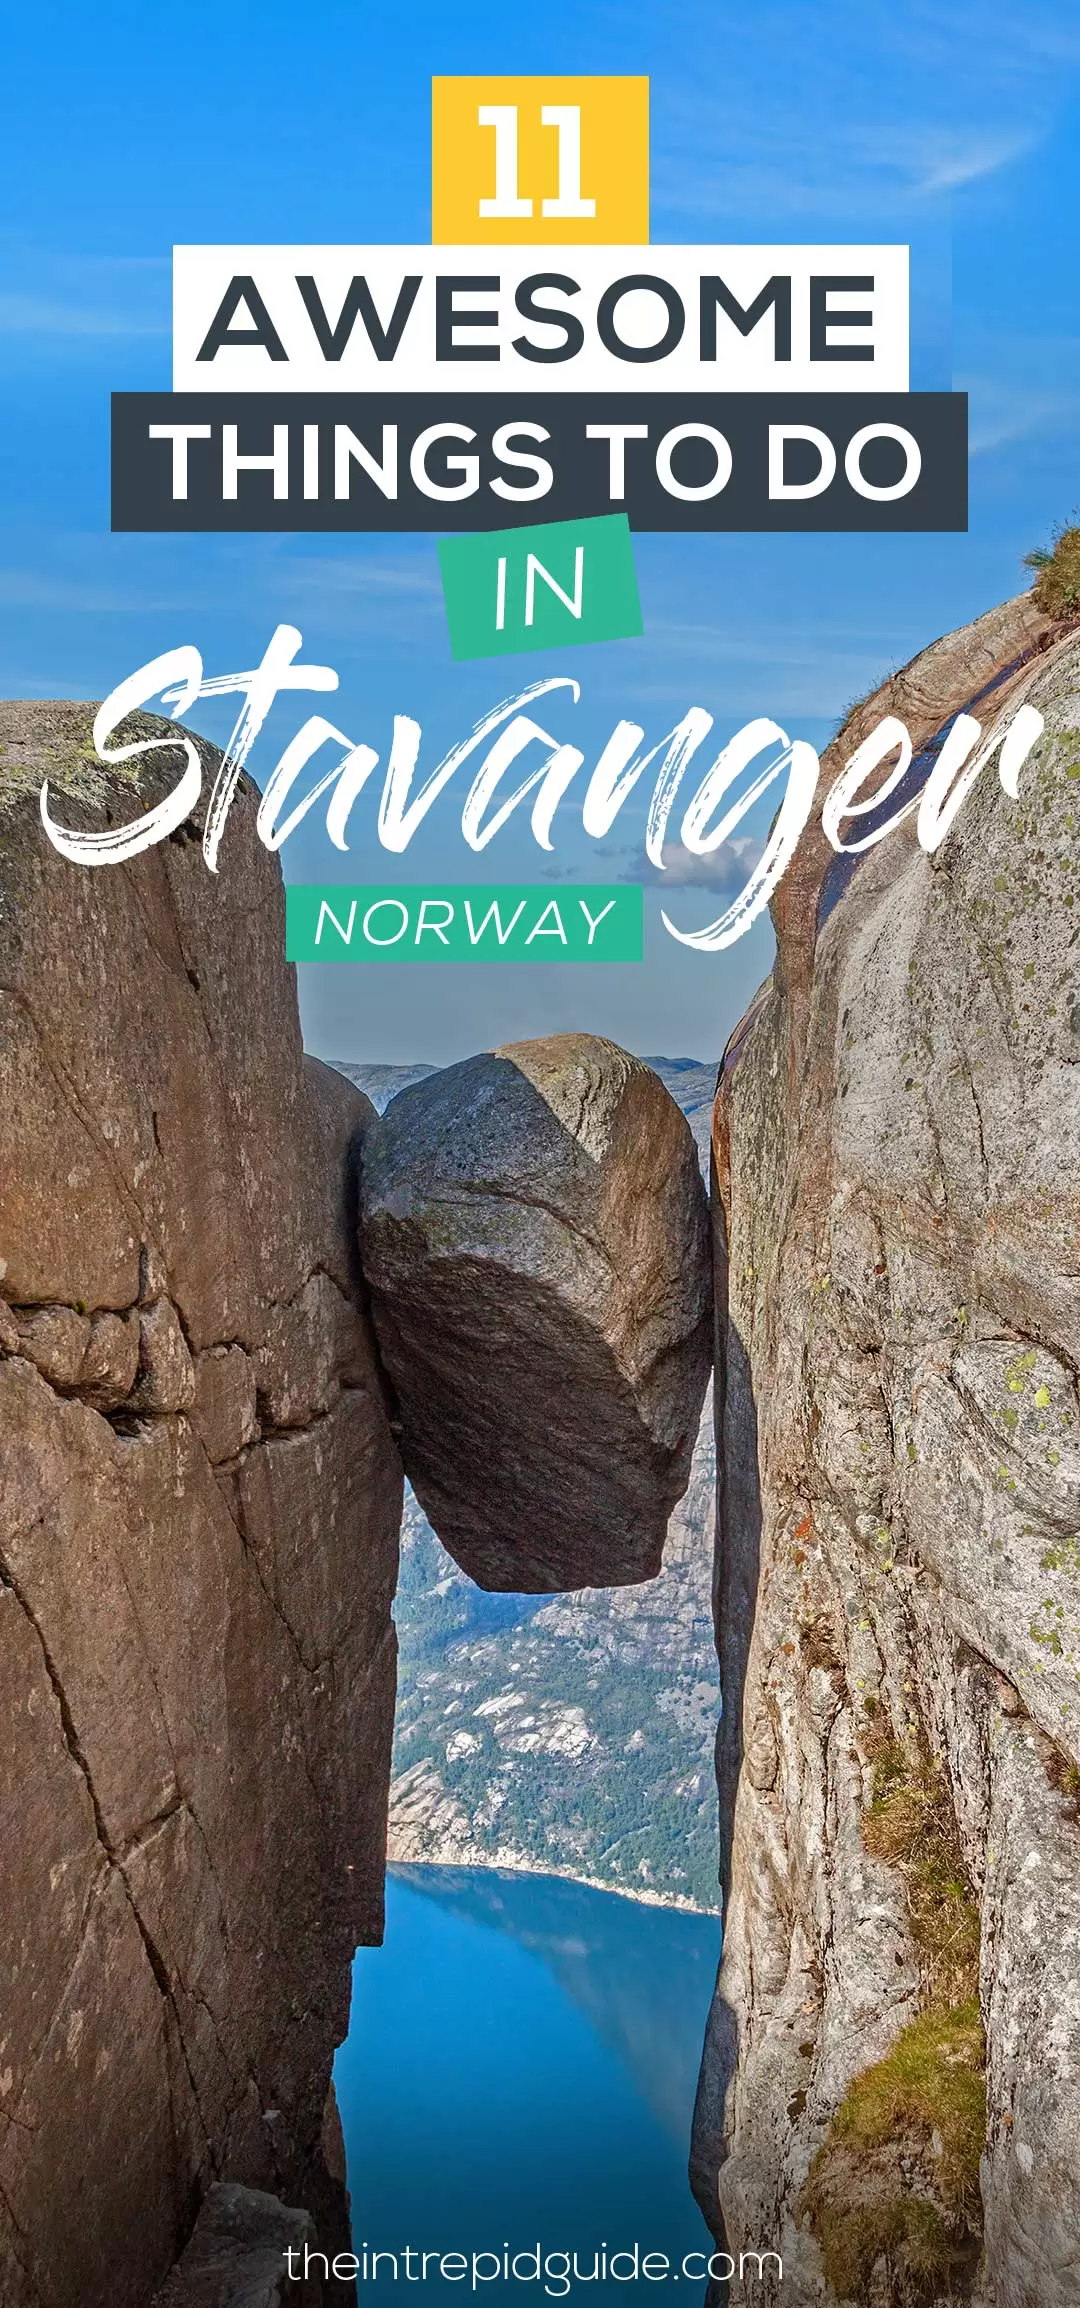 11 Awesome Things to do in Stavanger, Norway